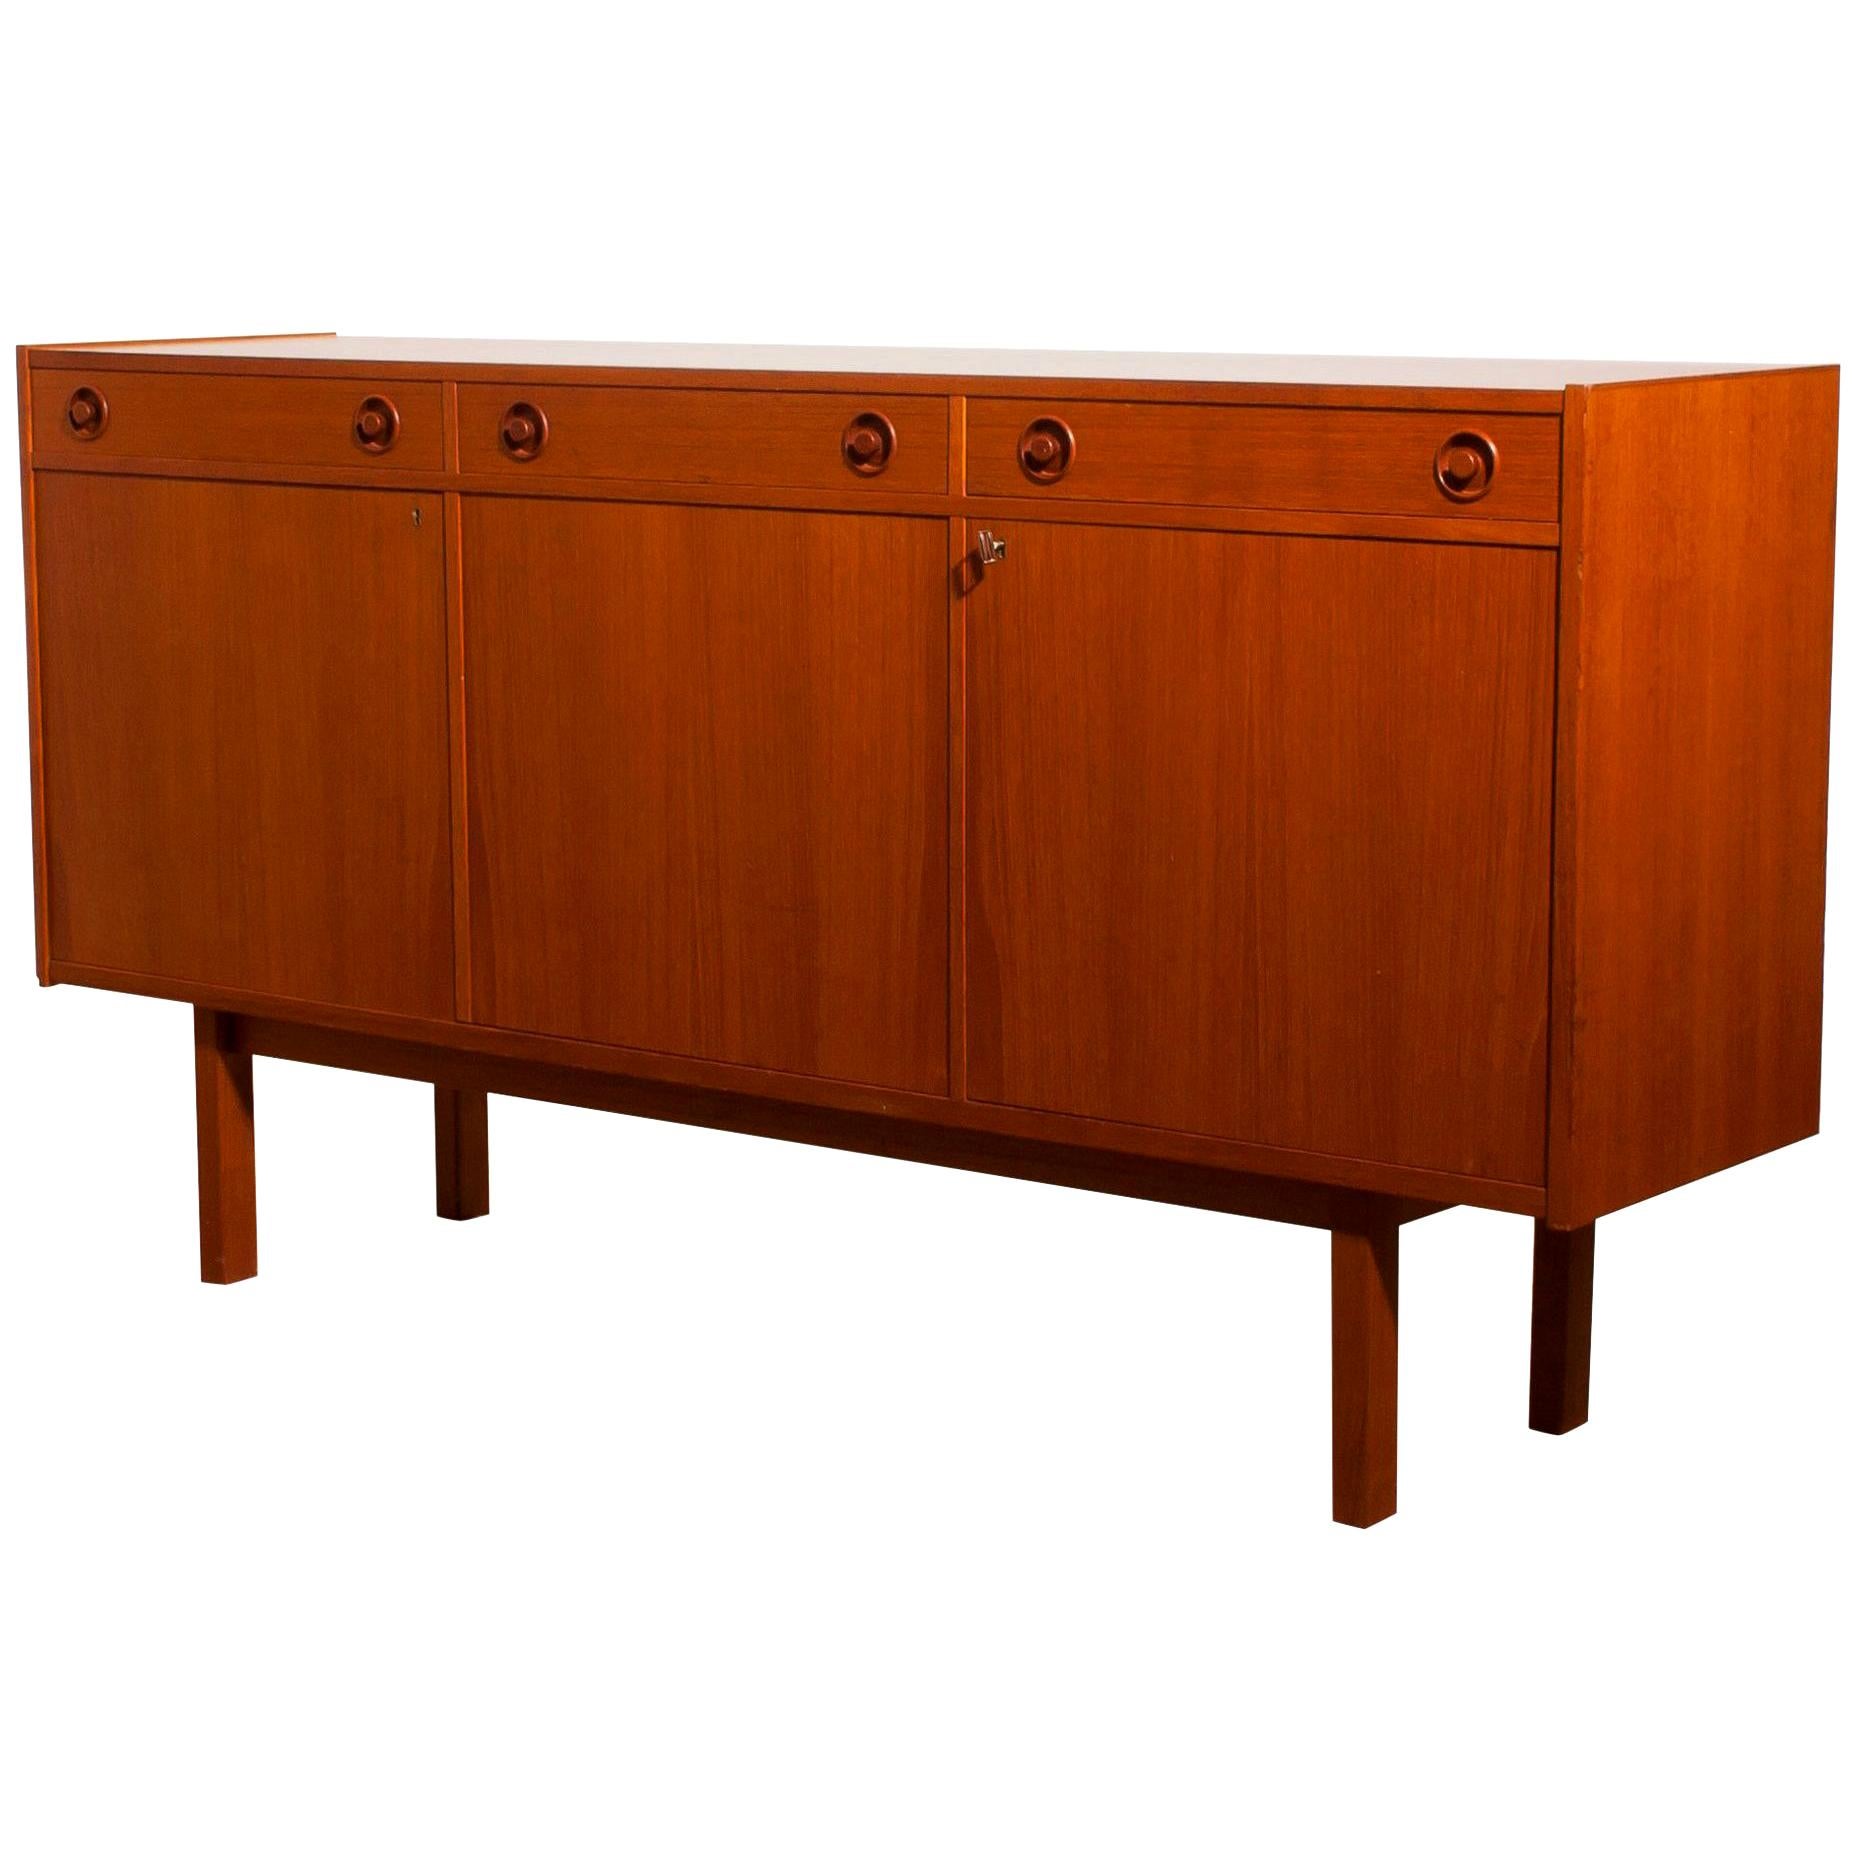 Beautiful sideboard produced by Brexo Möbler, Sweden.
This cabinet is made of teak and has three drawers and three doors.
It is in very nice condition with just a little spot on the top.
Key included.
Period 1950s.
Dimensions: H 90 cm, W 170 cm, D